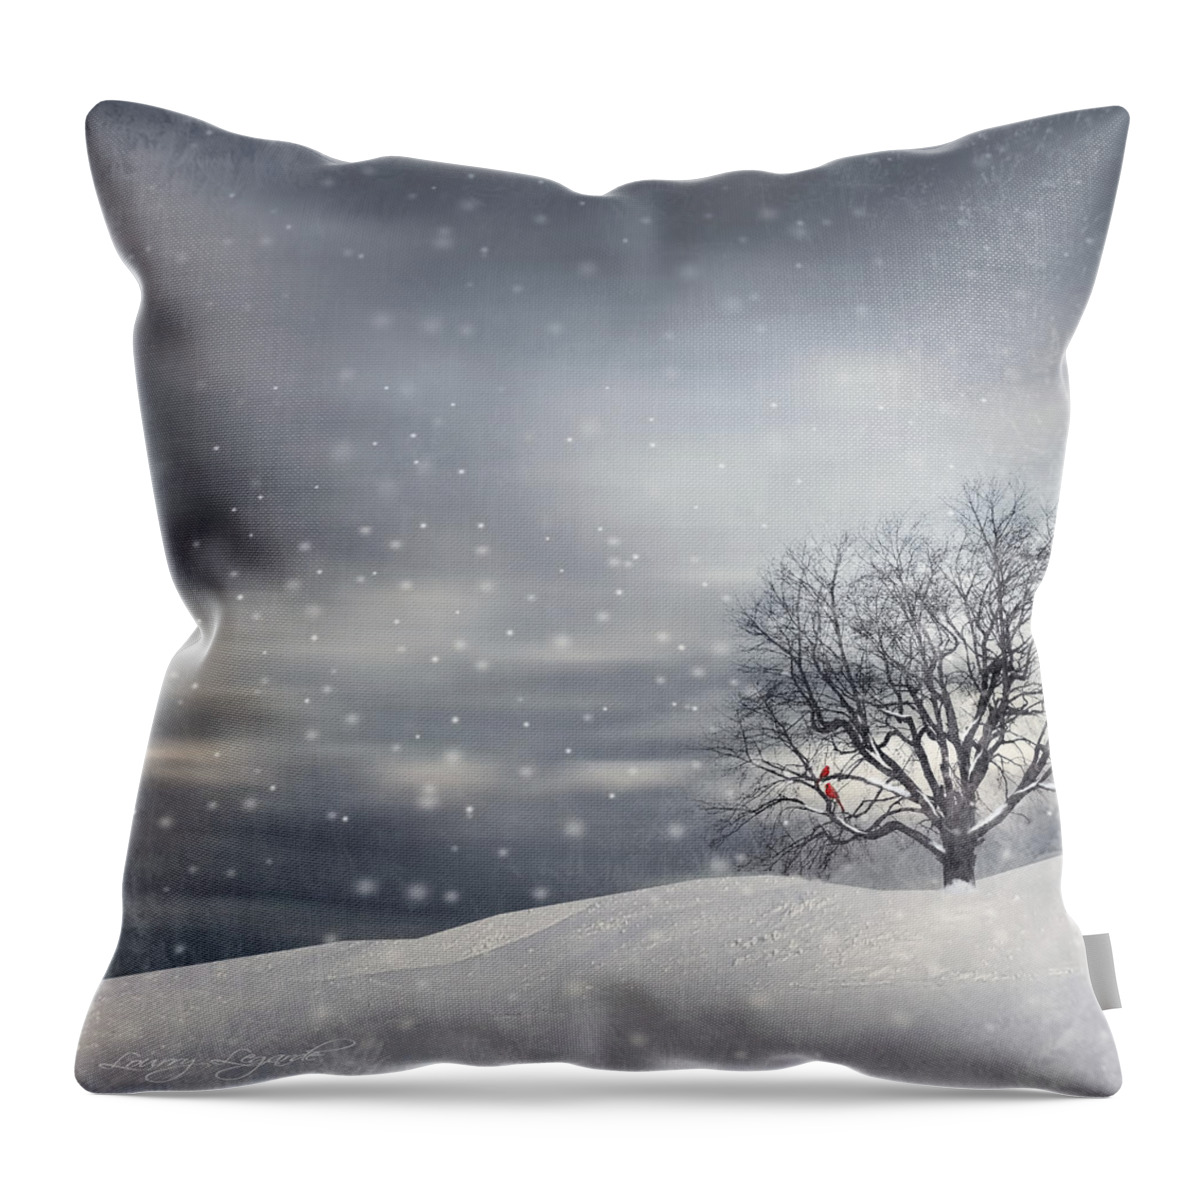 Four Seasons Throw Pillow featuring the photograph Winter by Lourry Legarde